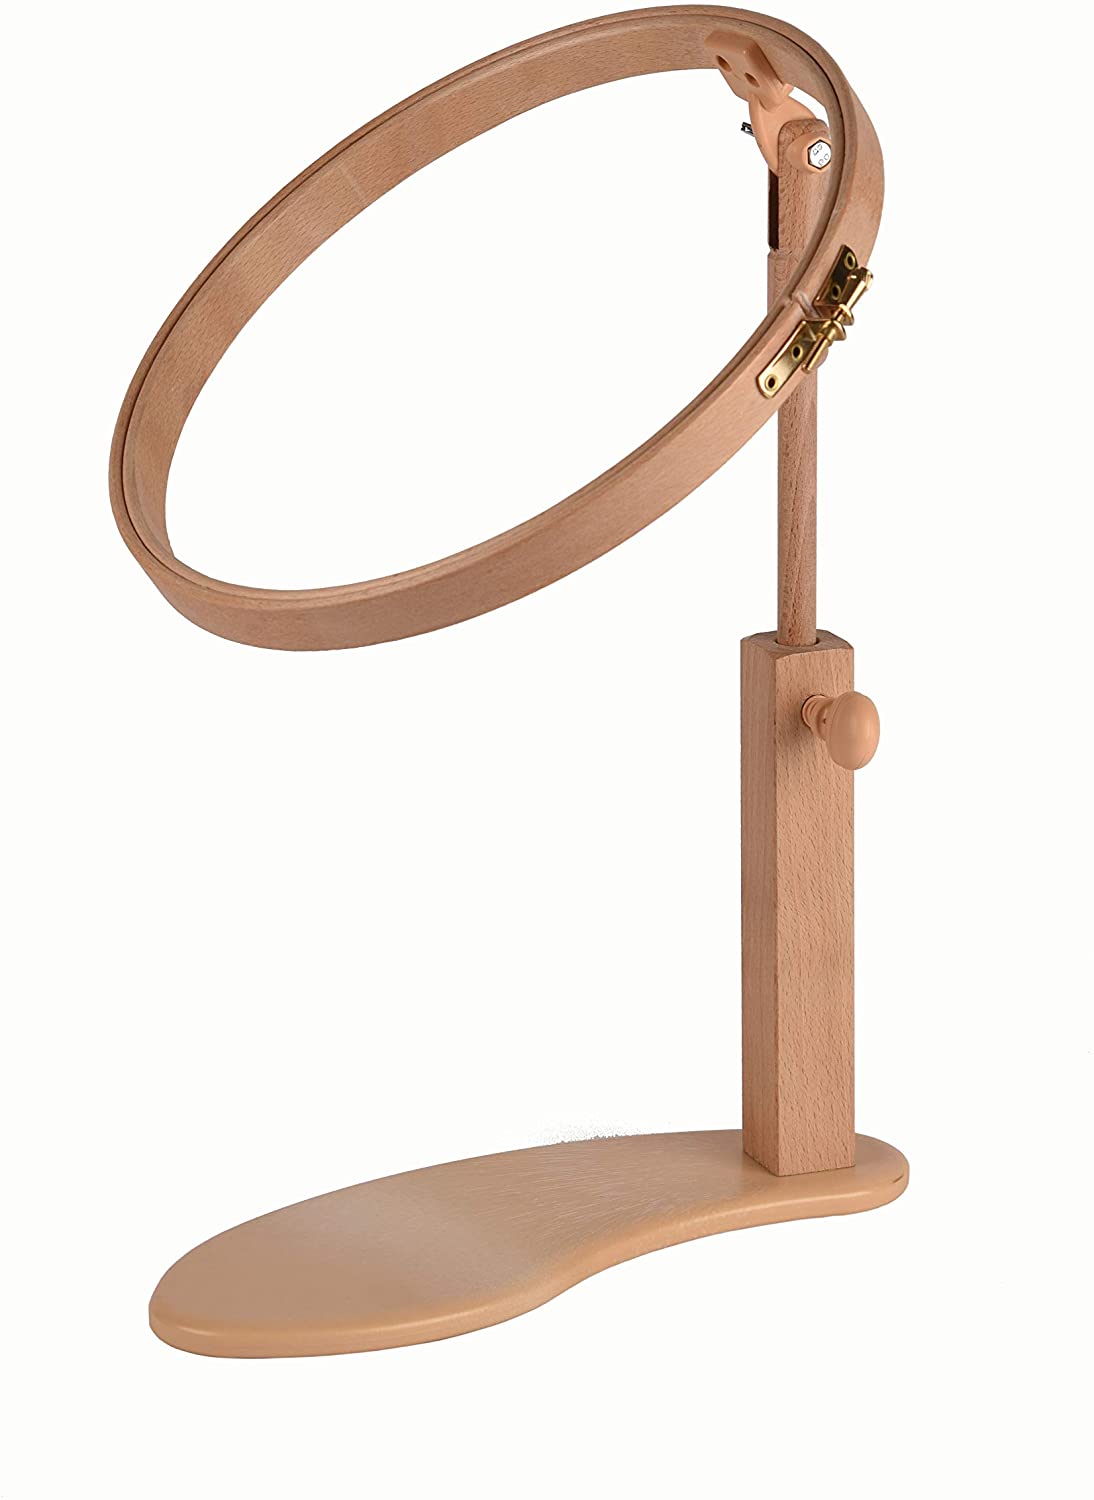 SEAT8E Seat Frame wooden effect base with 20cm  - 8" x  1" hoop by Elbesee 